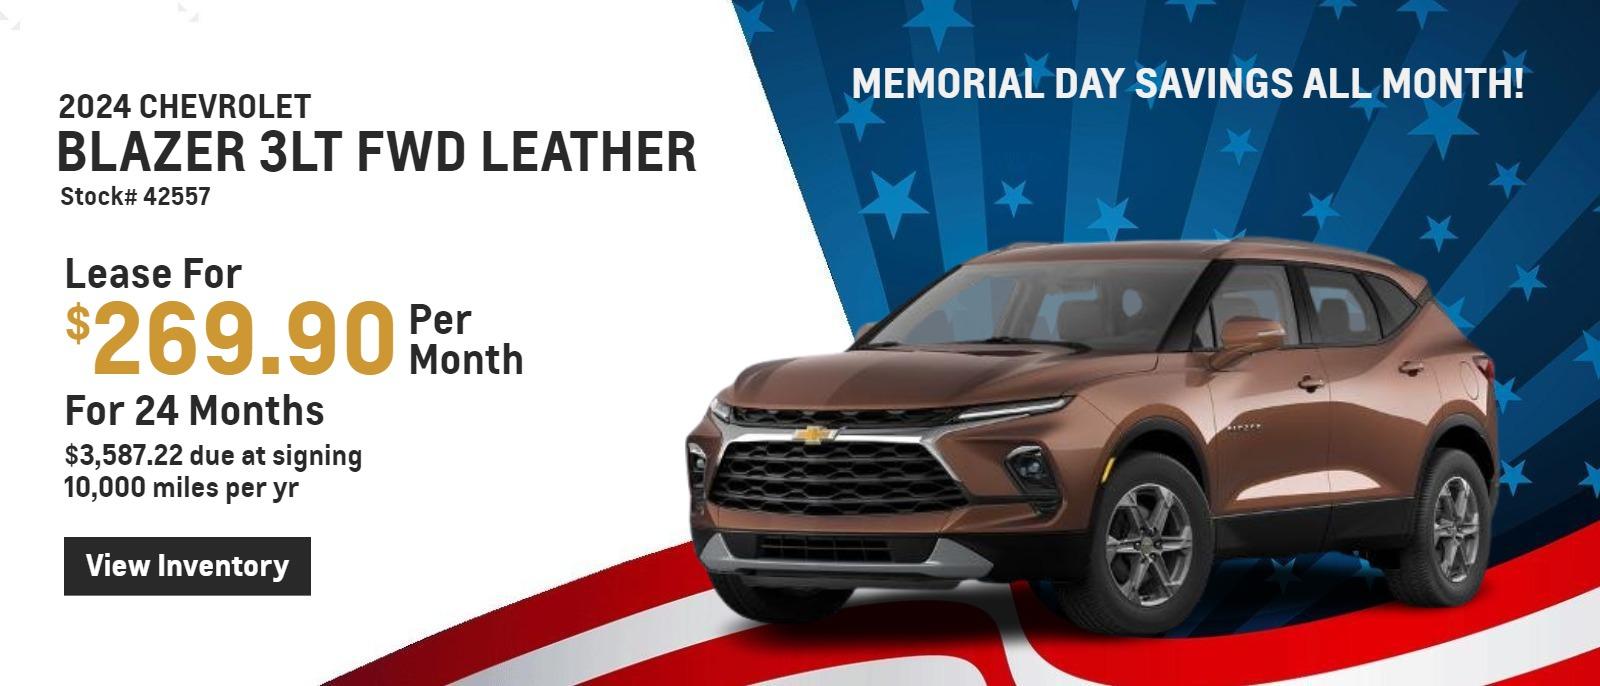 2024 Blazer 3LT FWD Leather
Stk# 42557
MSRP $41,050
$269.90 Per month*
$3,587.22 due at signing
24 months / 10,000 miles per yr
*Must have GMS, Requires a Chevrolet Lease in household, with good credit approved Plus Lease State & Dealer fees